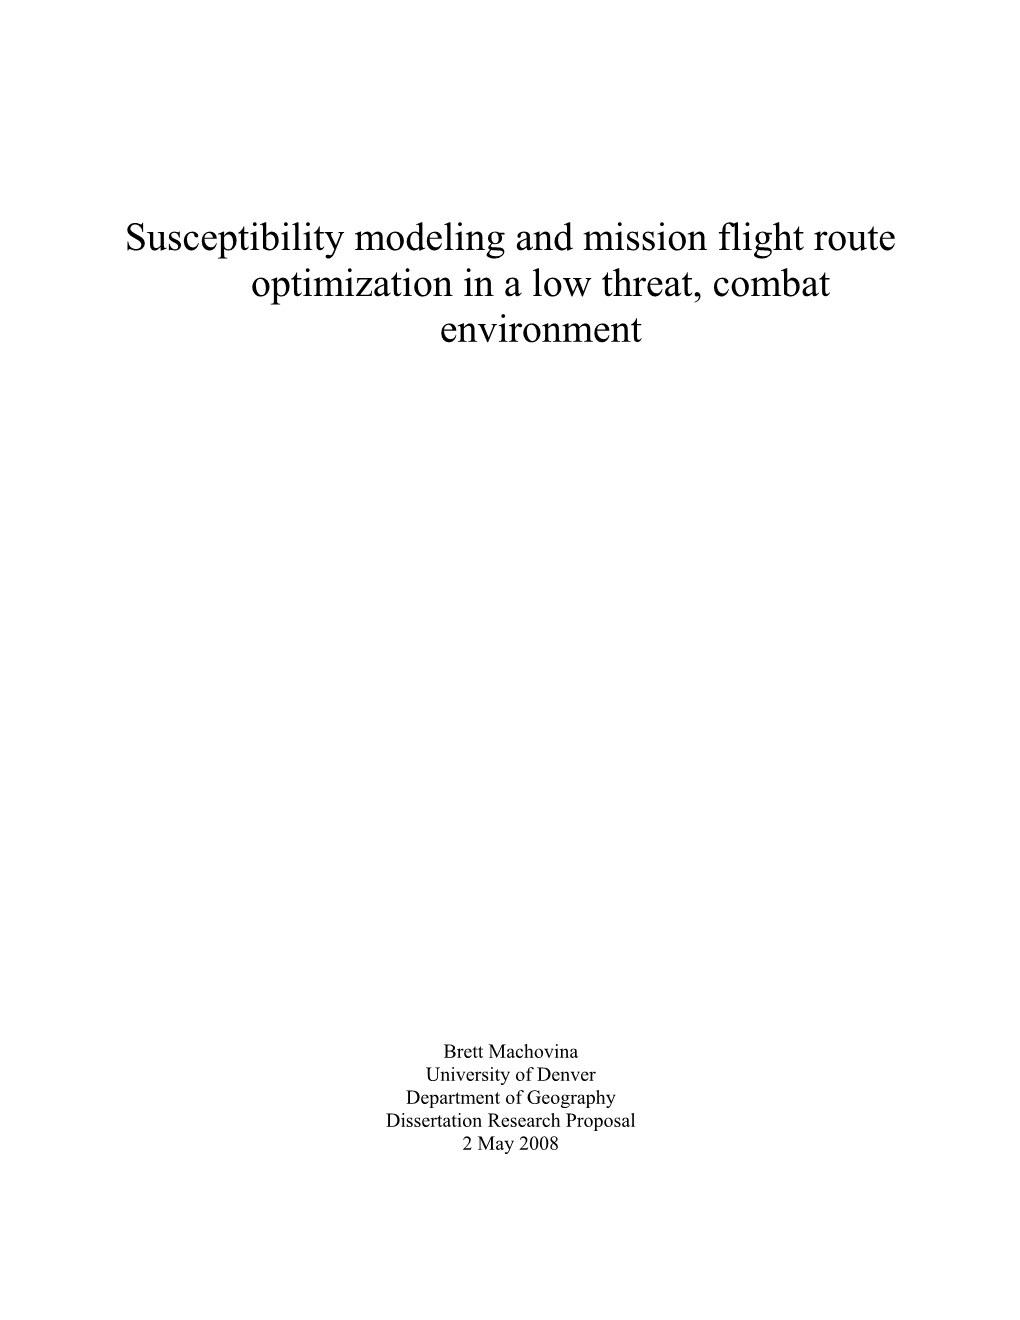 Susceptibility Modeling and Mission Flight Route Optimization in a Low Threat, Combat